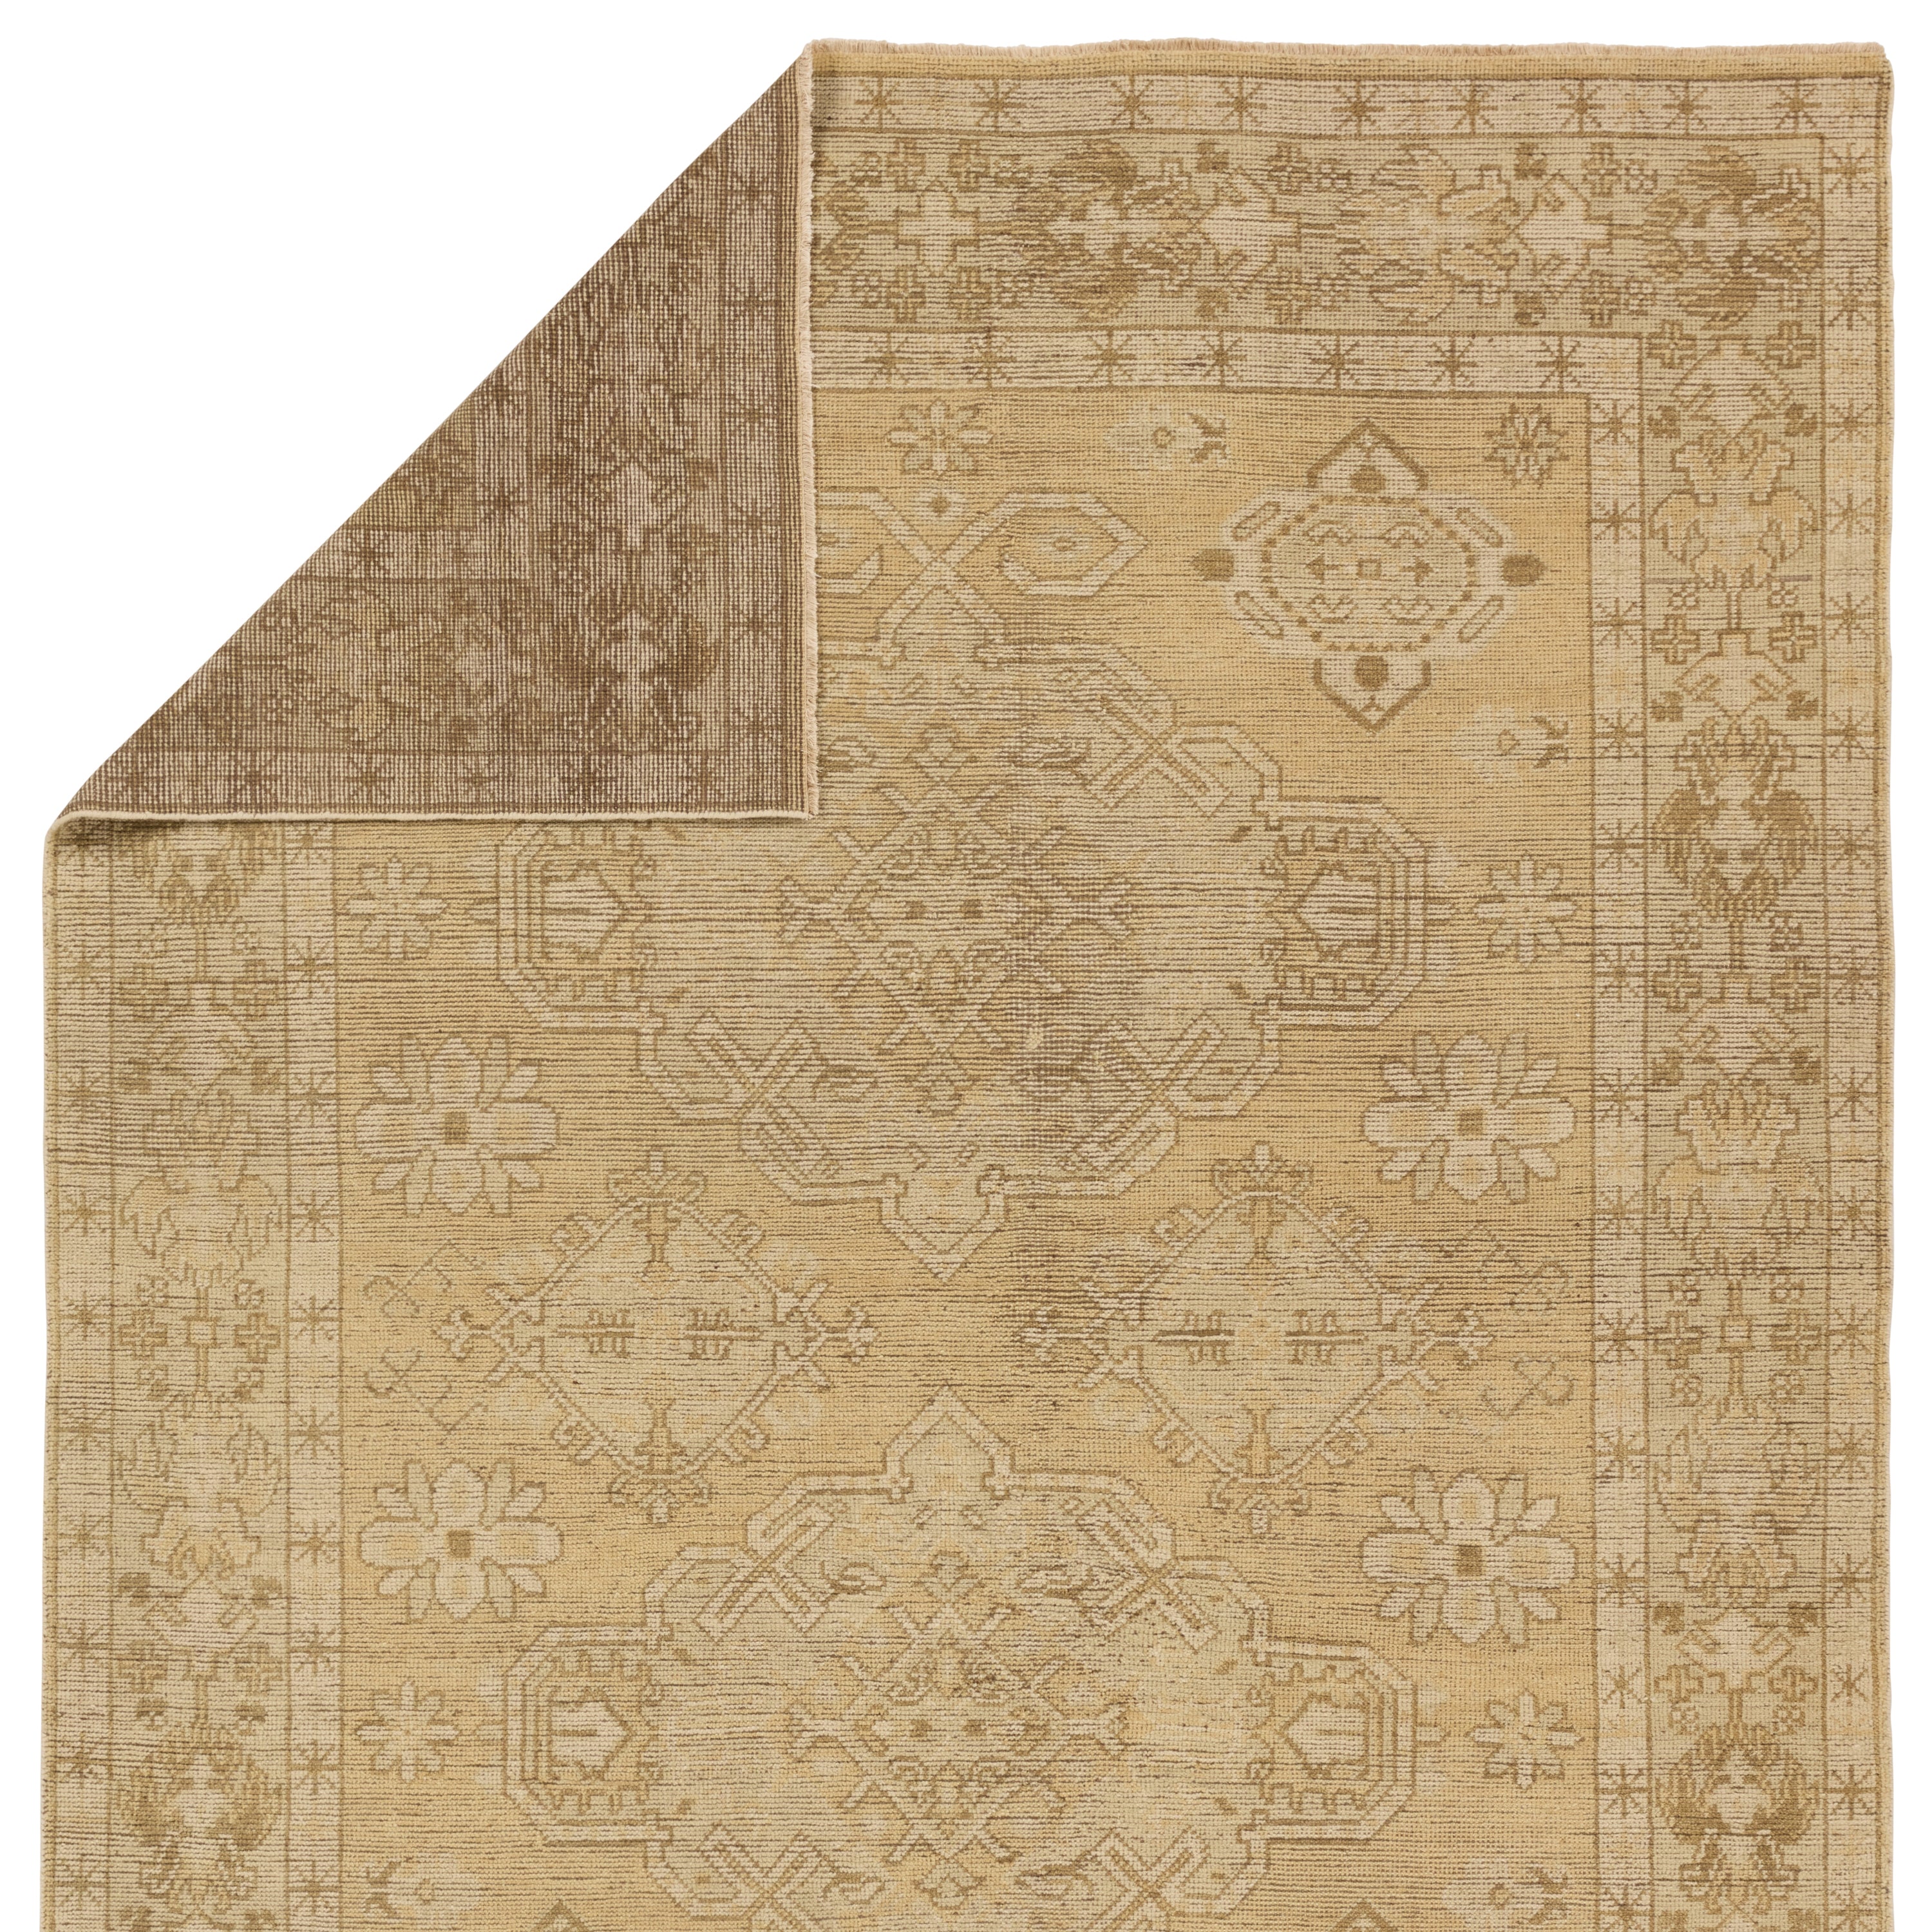 The Rhapsody collection features heirloom-quality designs of stunningly abrashed Old World patterns. The Folklore area rug boasts a beautifully washed medallion motif with a decorative border. The khaki tones are accented with cream and taupe hues for added depth and intrigue. This durable wool handknot anchors living spaces with a fresh take on vintage style. Amethyst Home provides interior design, new construction, custom furniture, and area rugs in the Omaha metro area.